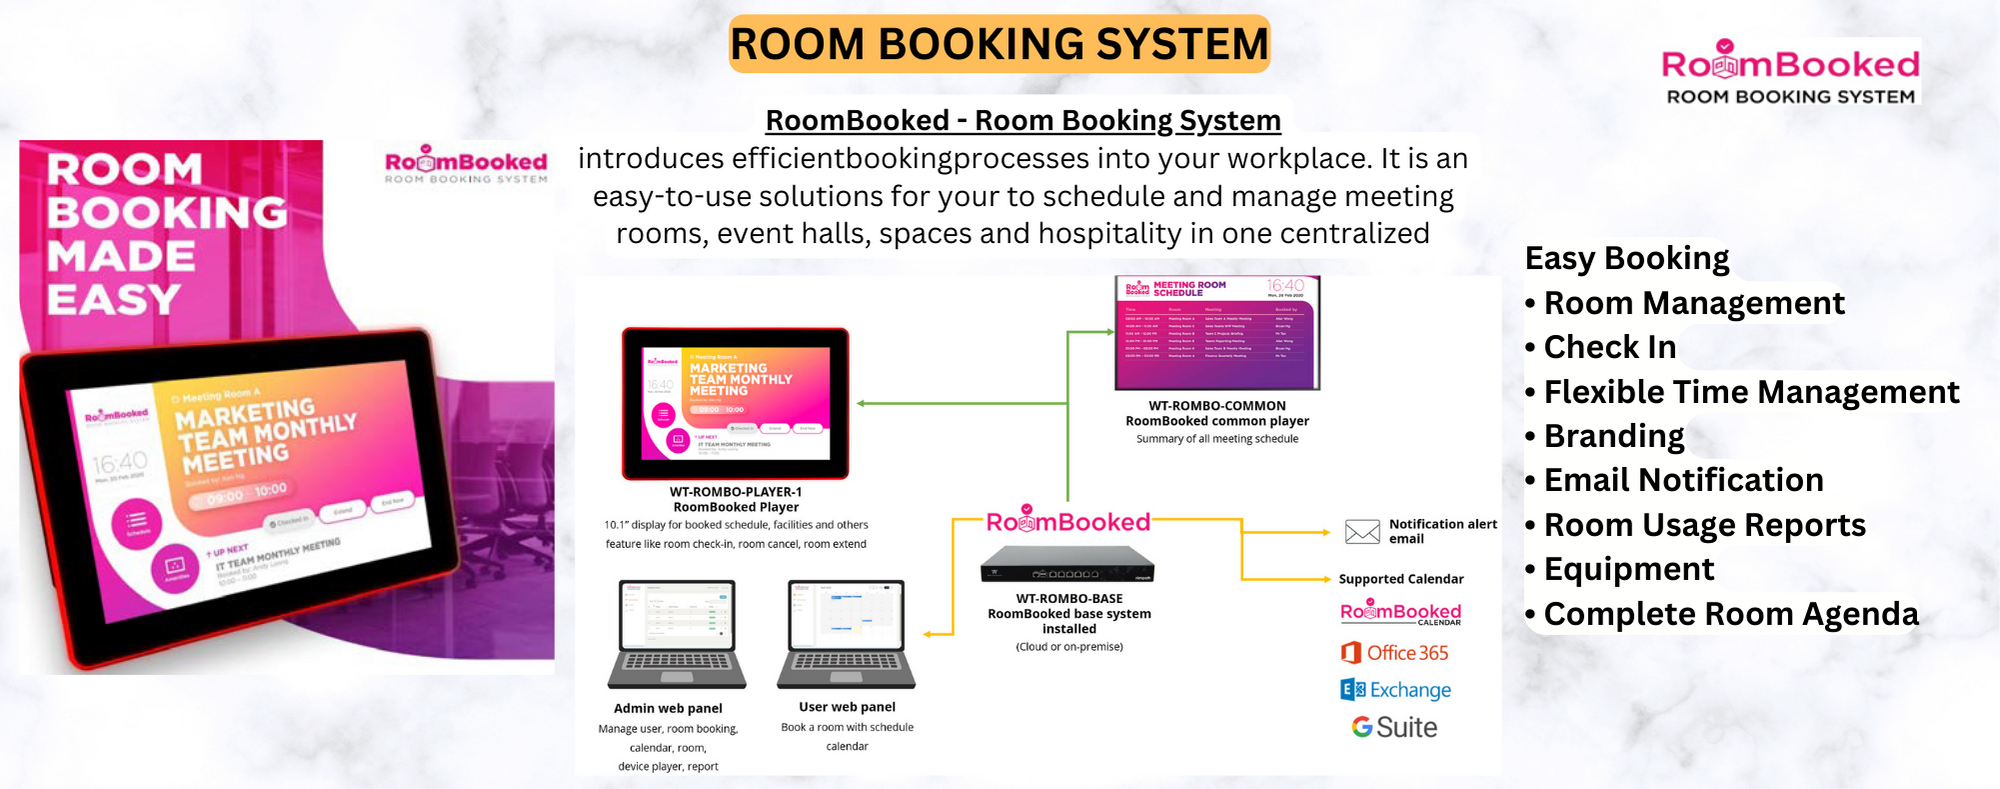 ROOM BOOKING SYSTEM